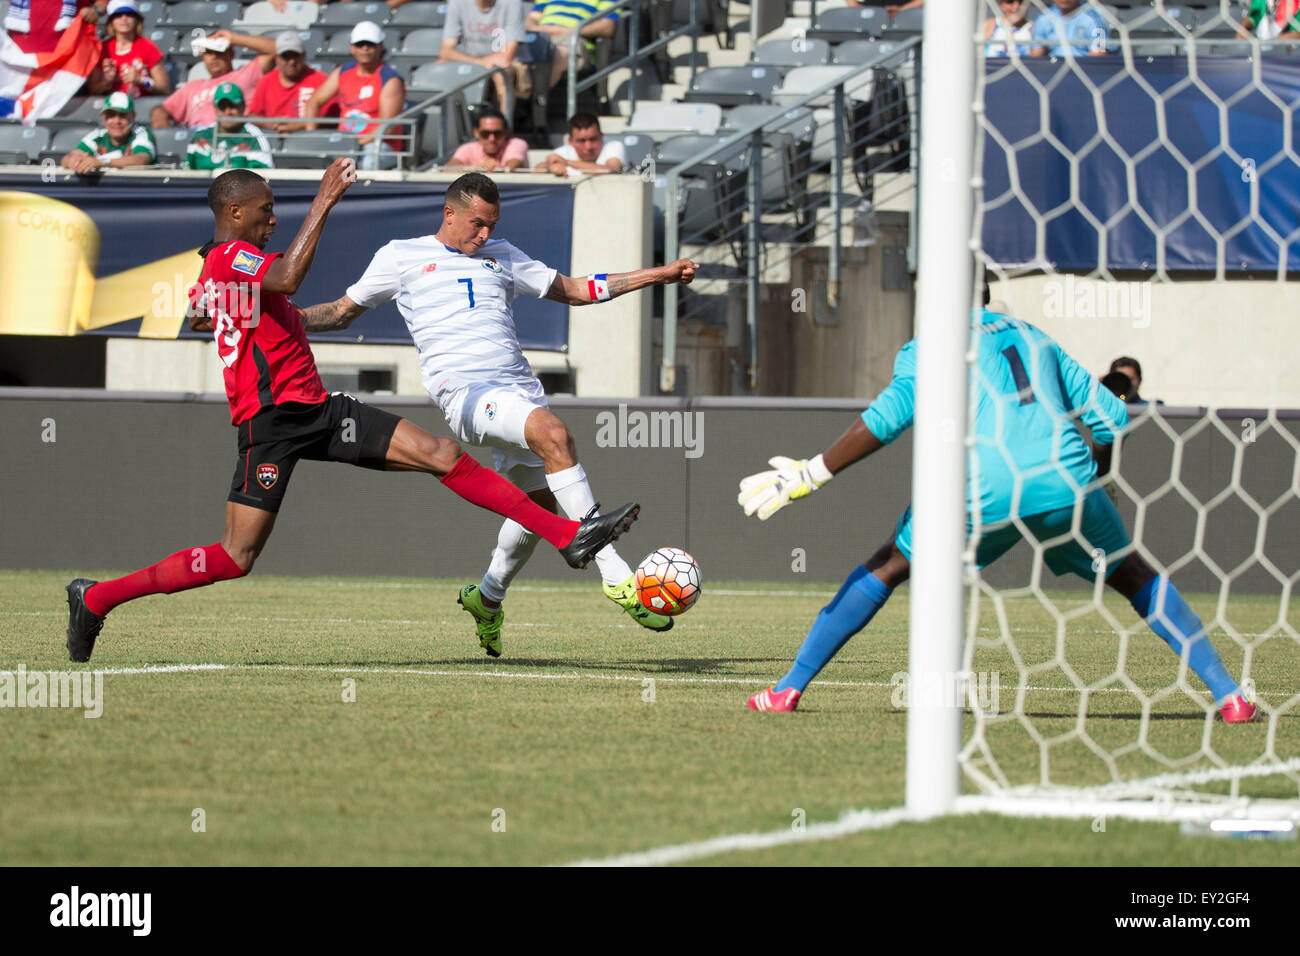 The Match By Shootout. 19th July, 2015. Panama forward Blas Perez (7) tries to shoot the ball on Trinidad & Tobago goalkeeper Marvin Phillip (1) as midfielder Kevan George (19) defending during the CONCACAF Gold Cup 2015 Quarterfinal match between the Trinidad & Tobago and Panama at MetLife Stadium in East Rutherford, New Jersey. Panama won the match by shootout. (Christopher Szagola/Cal Sport Media) © csm/Alamy Live News Stock Photo